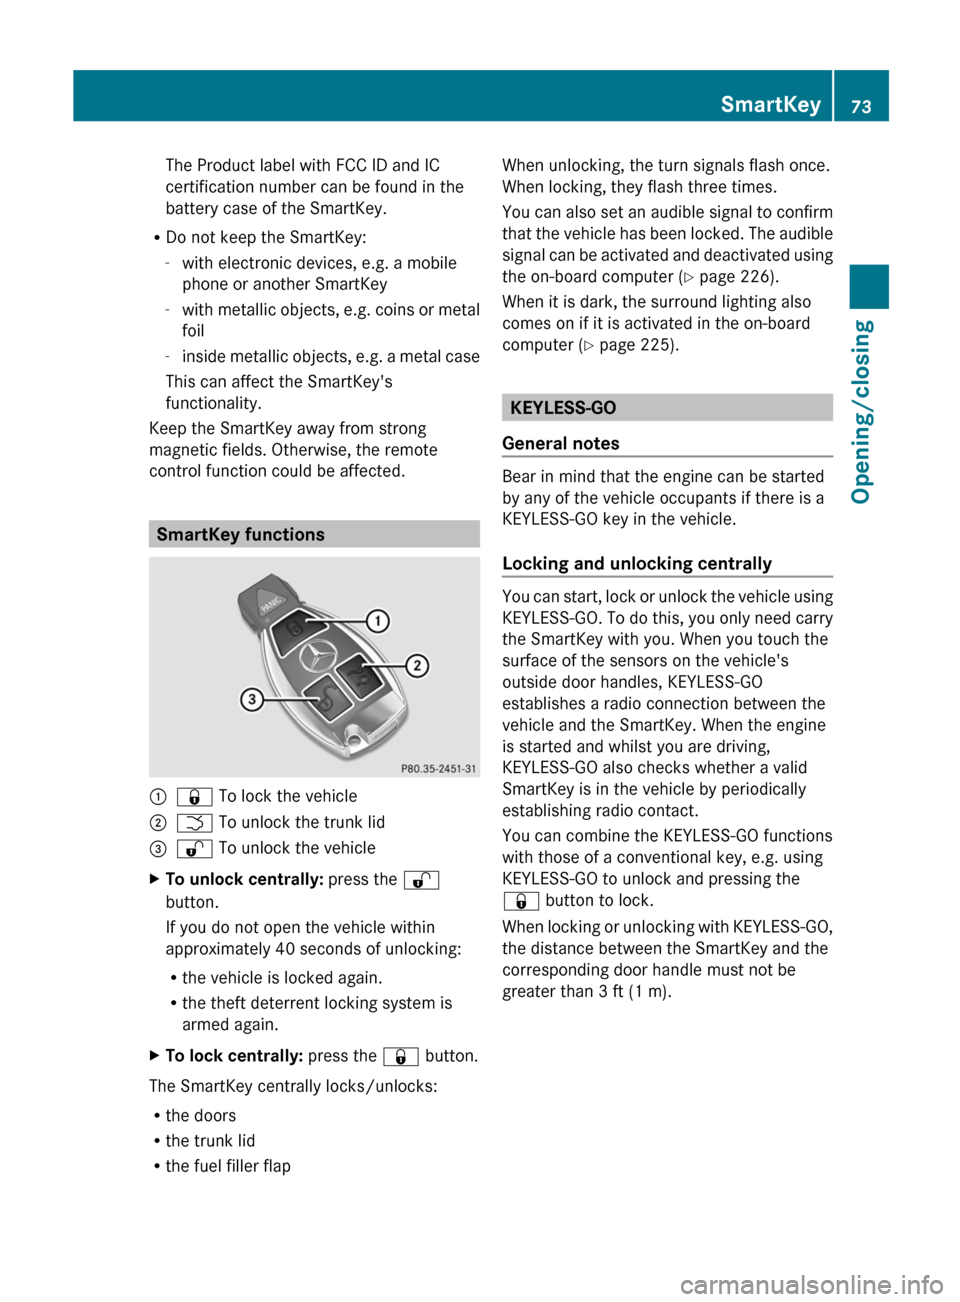 MERCEDES-BENZ E-Class CABRIOLET 2013 C207 Owners Manual The Product label with FCC ID and IC
certification number can be found in the
battery case of the SmartKey.
R Do not keep the SmartKey:
-with electronic devices, e.g. a mobile
phone or another SmartKe